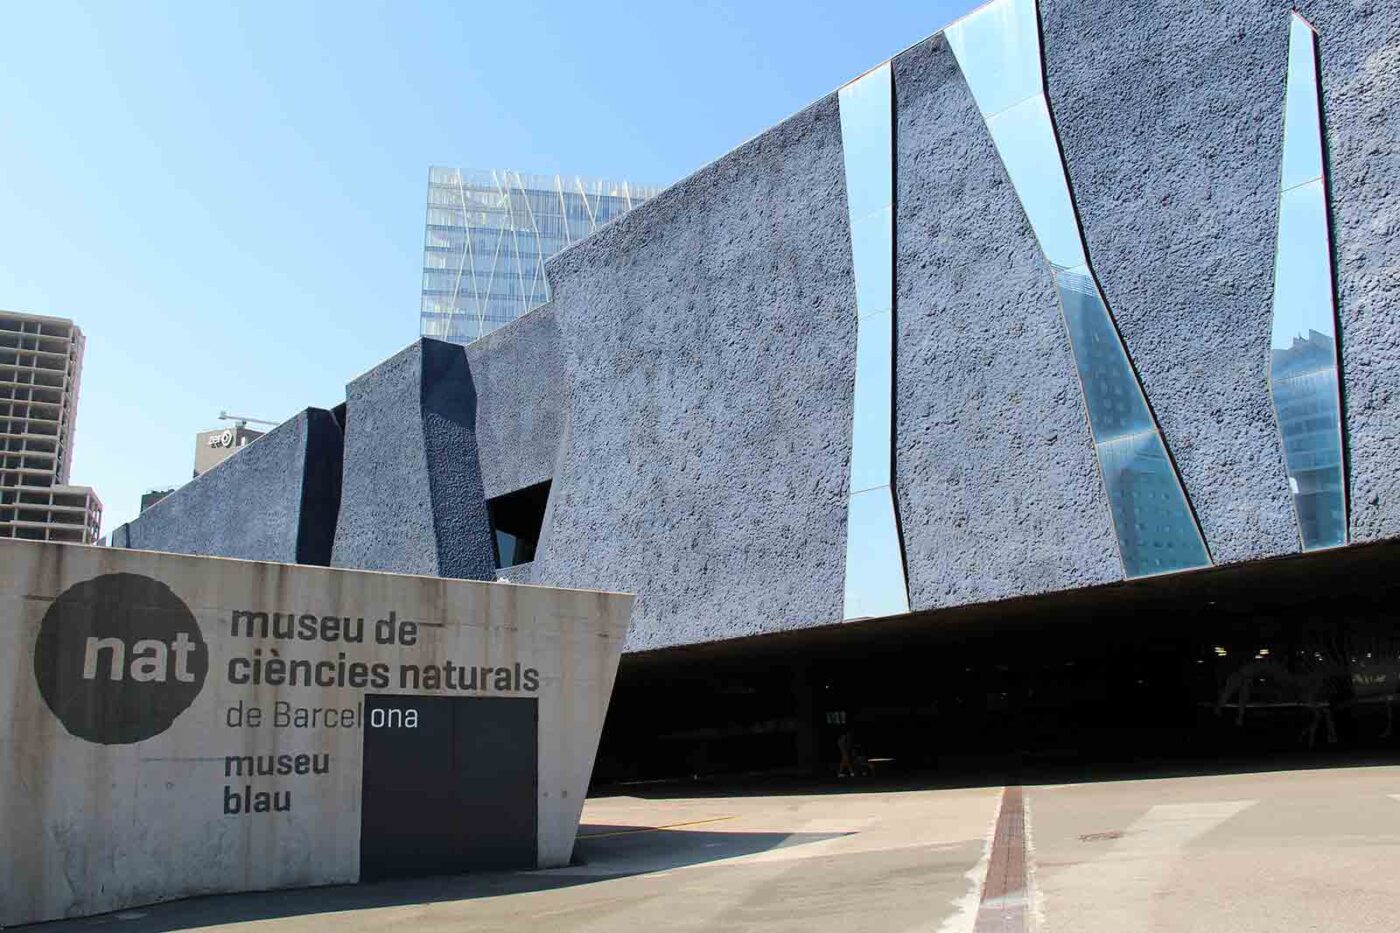 Museum of Natural Sciences of Barcelona